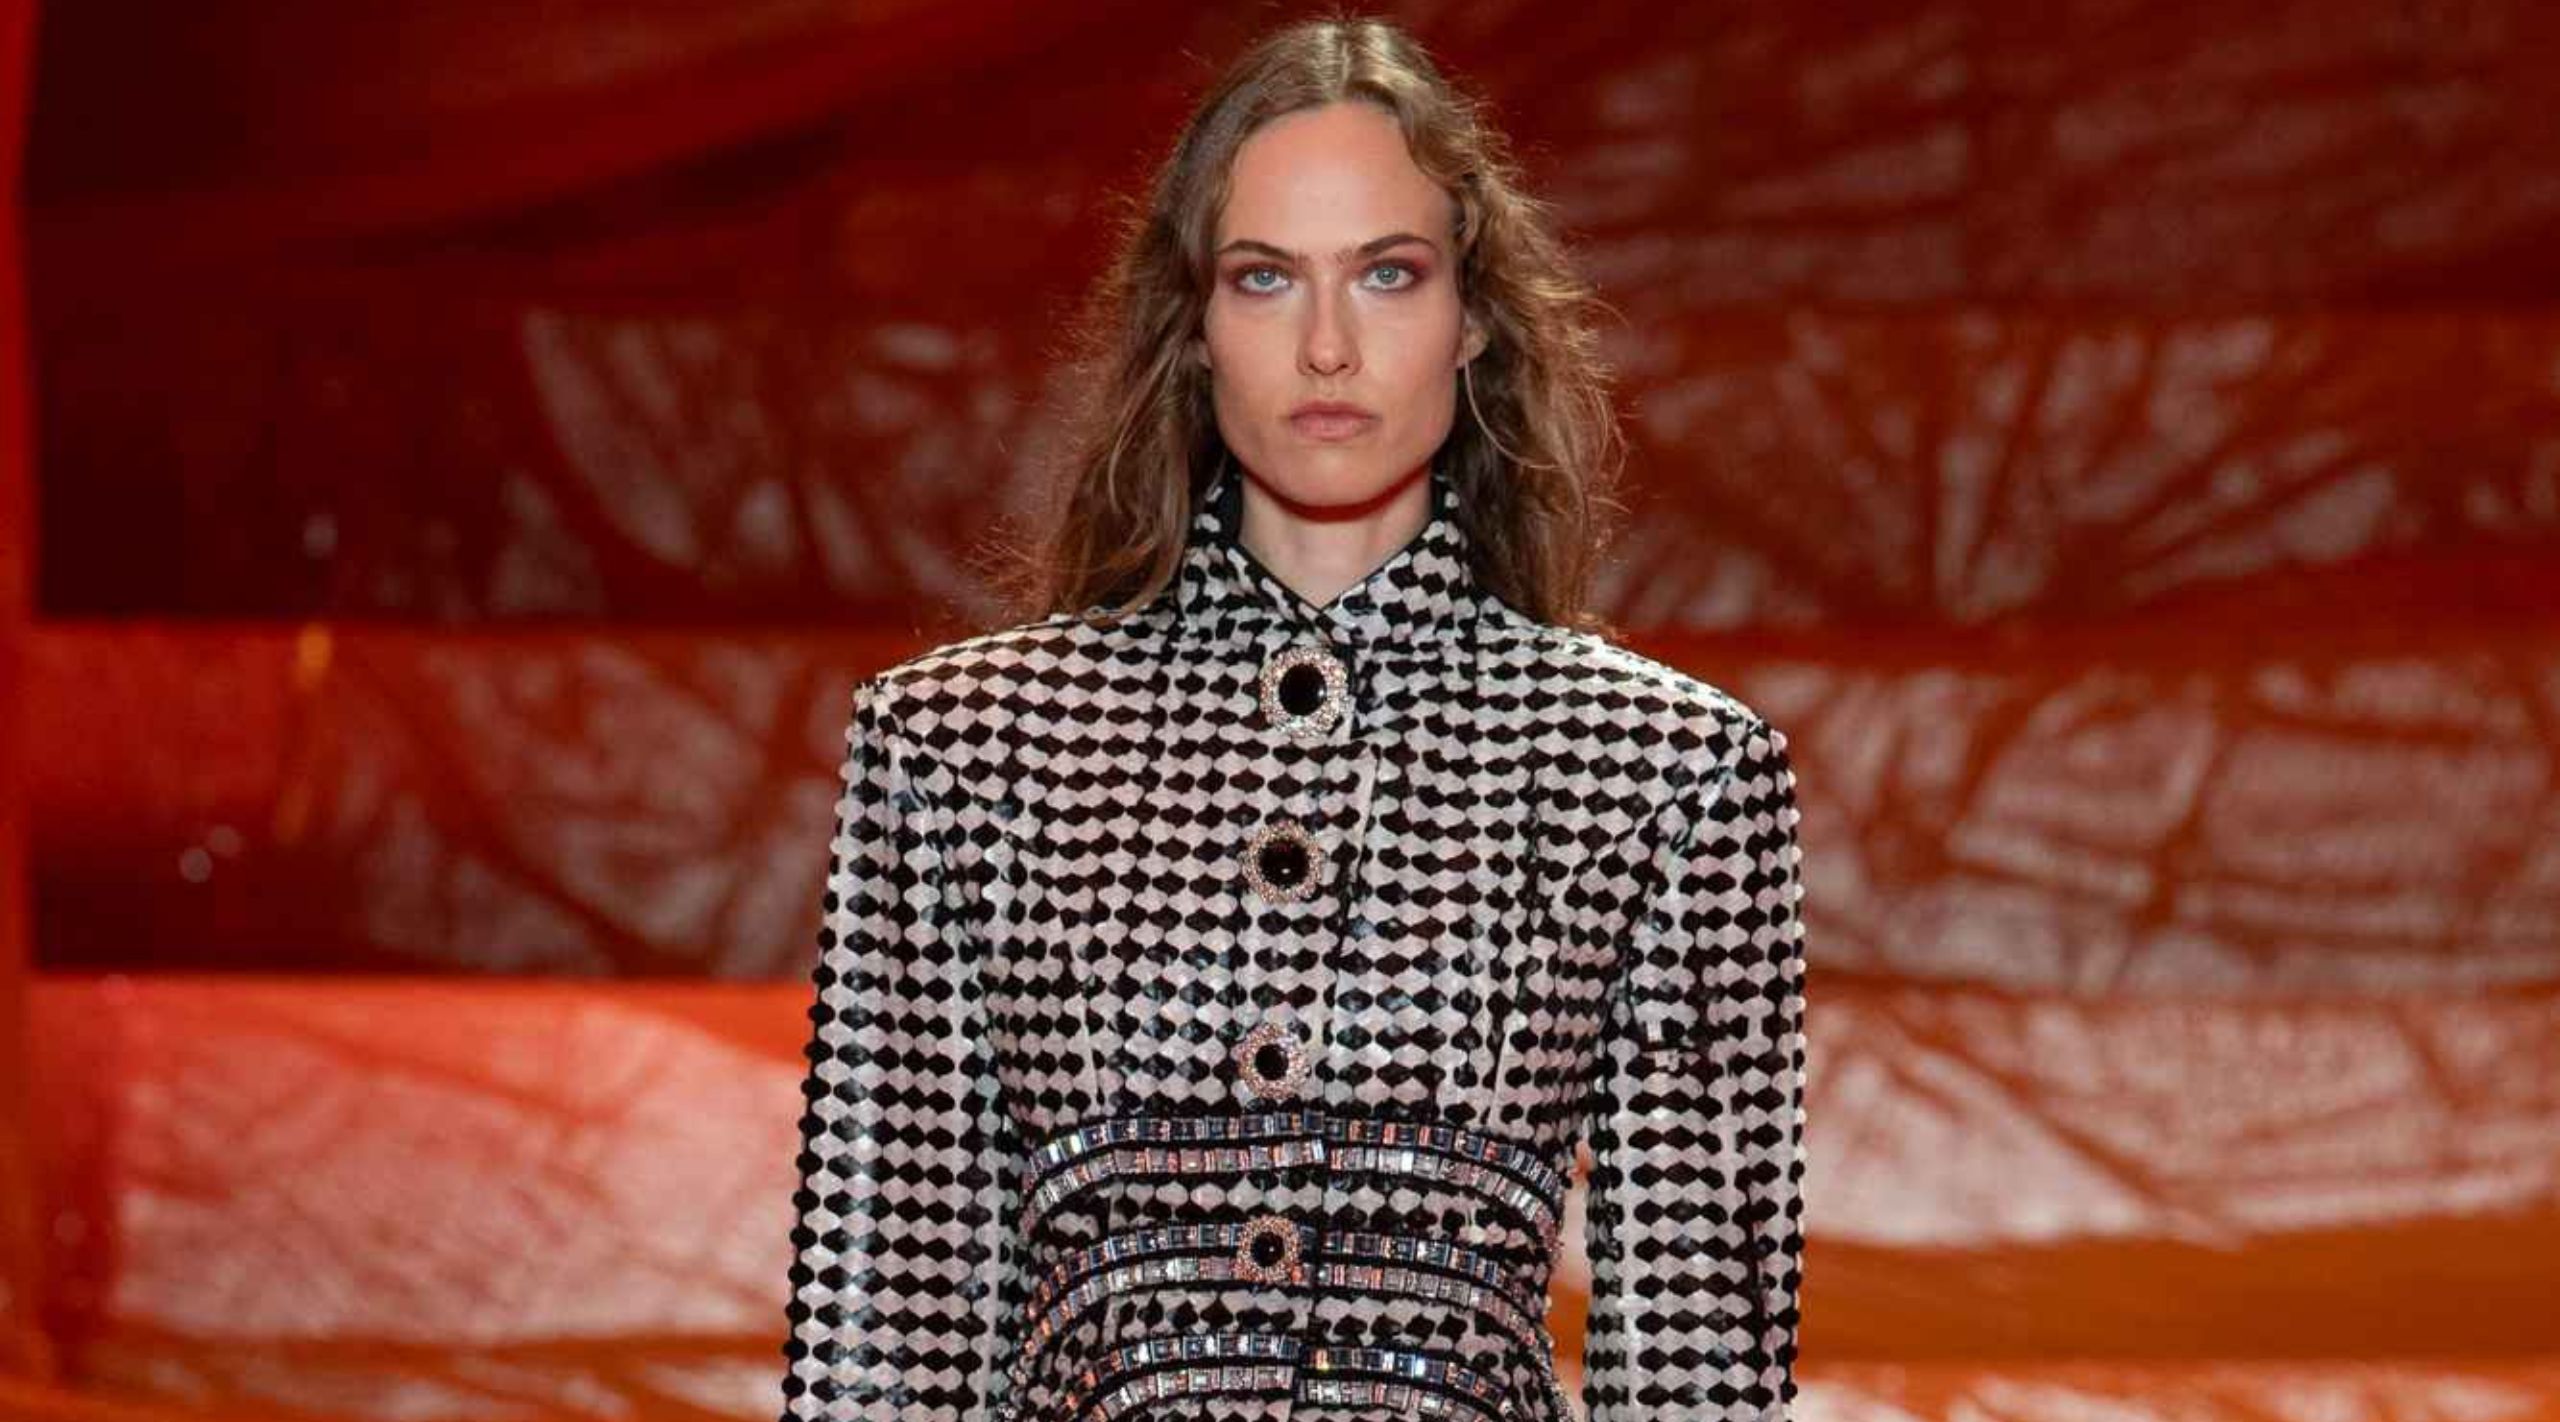 Louis Vuitton S/S24 Looks to the Transformative Power of Travel